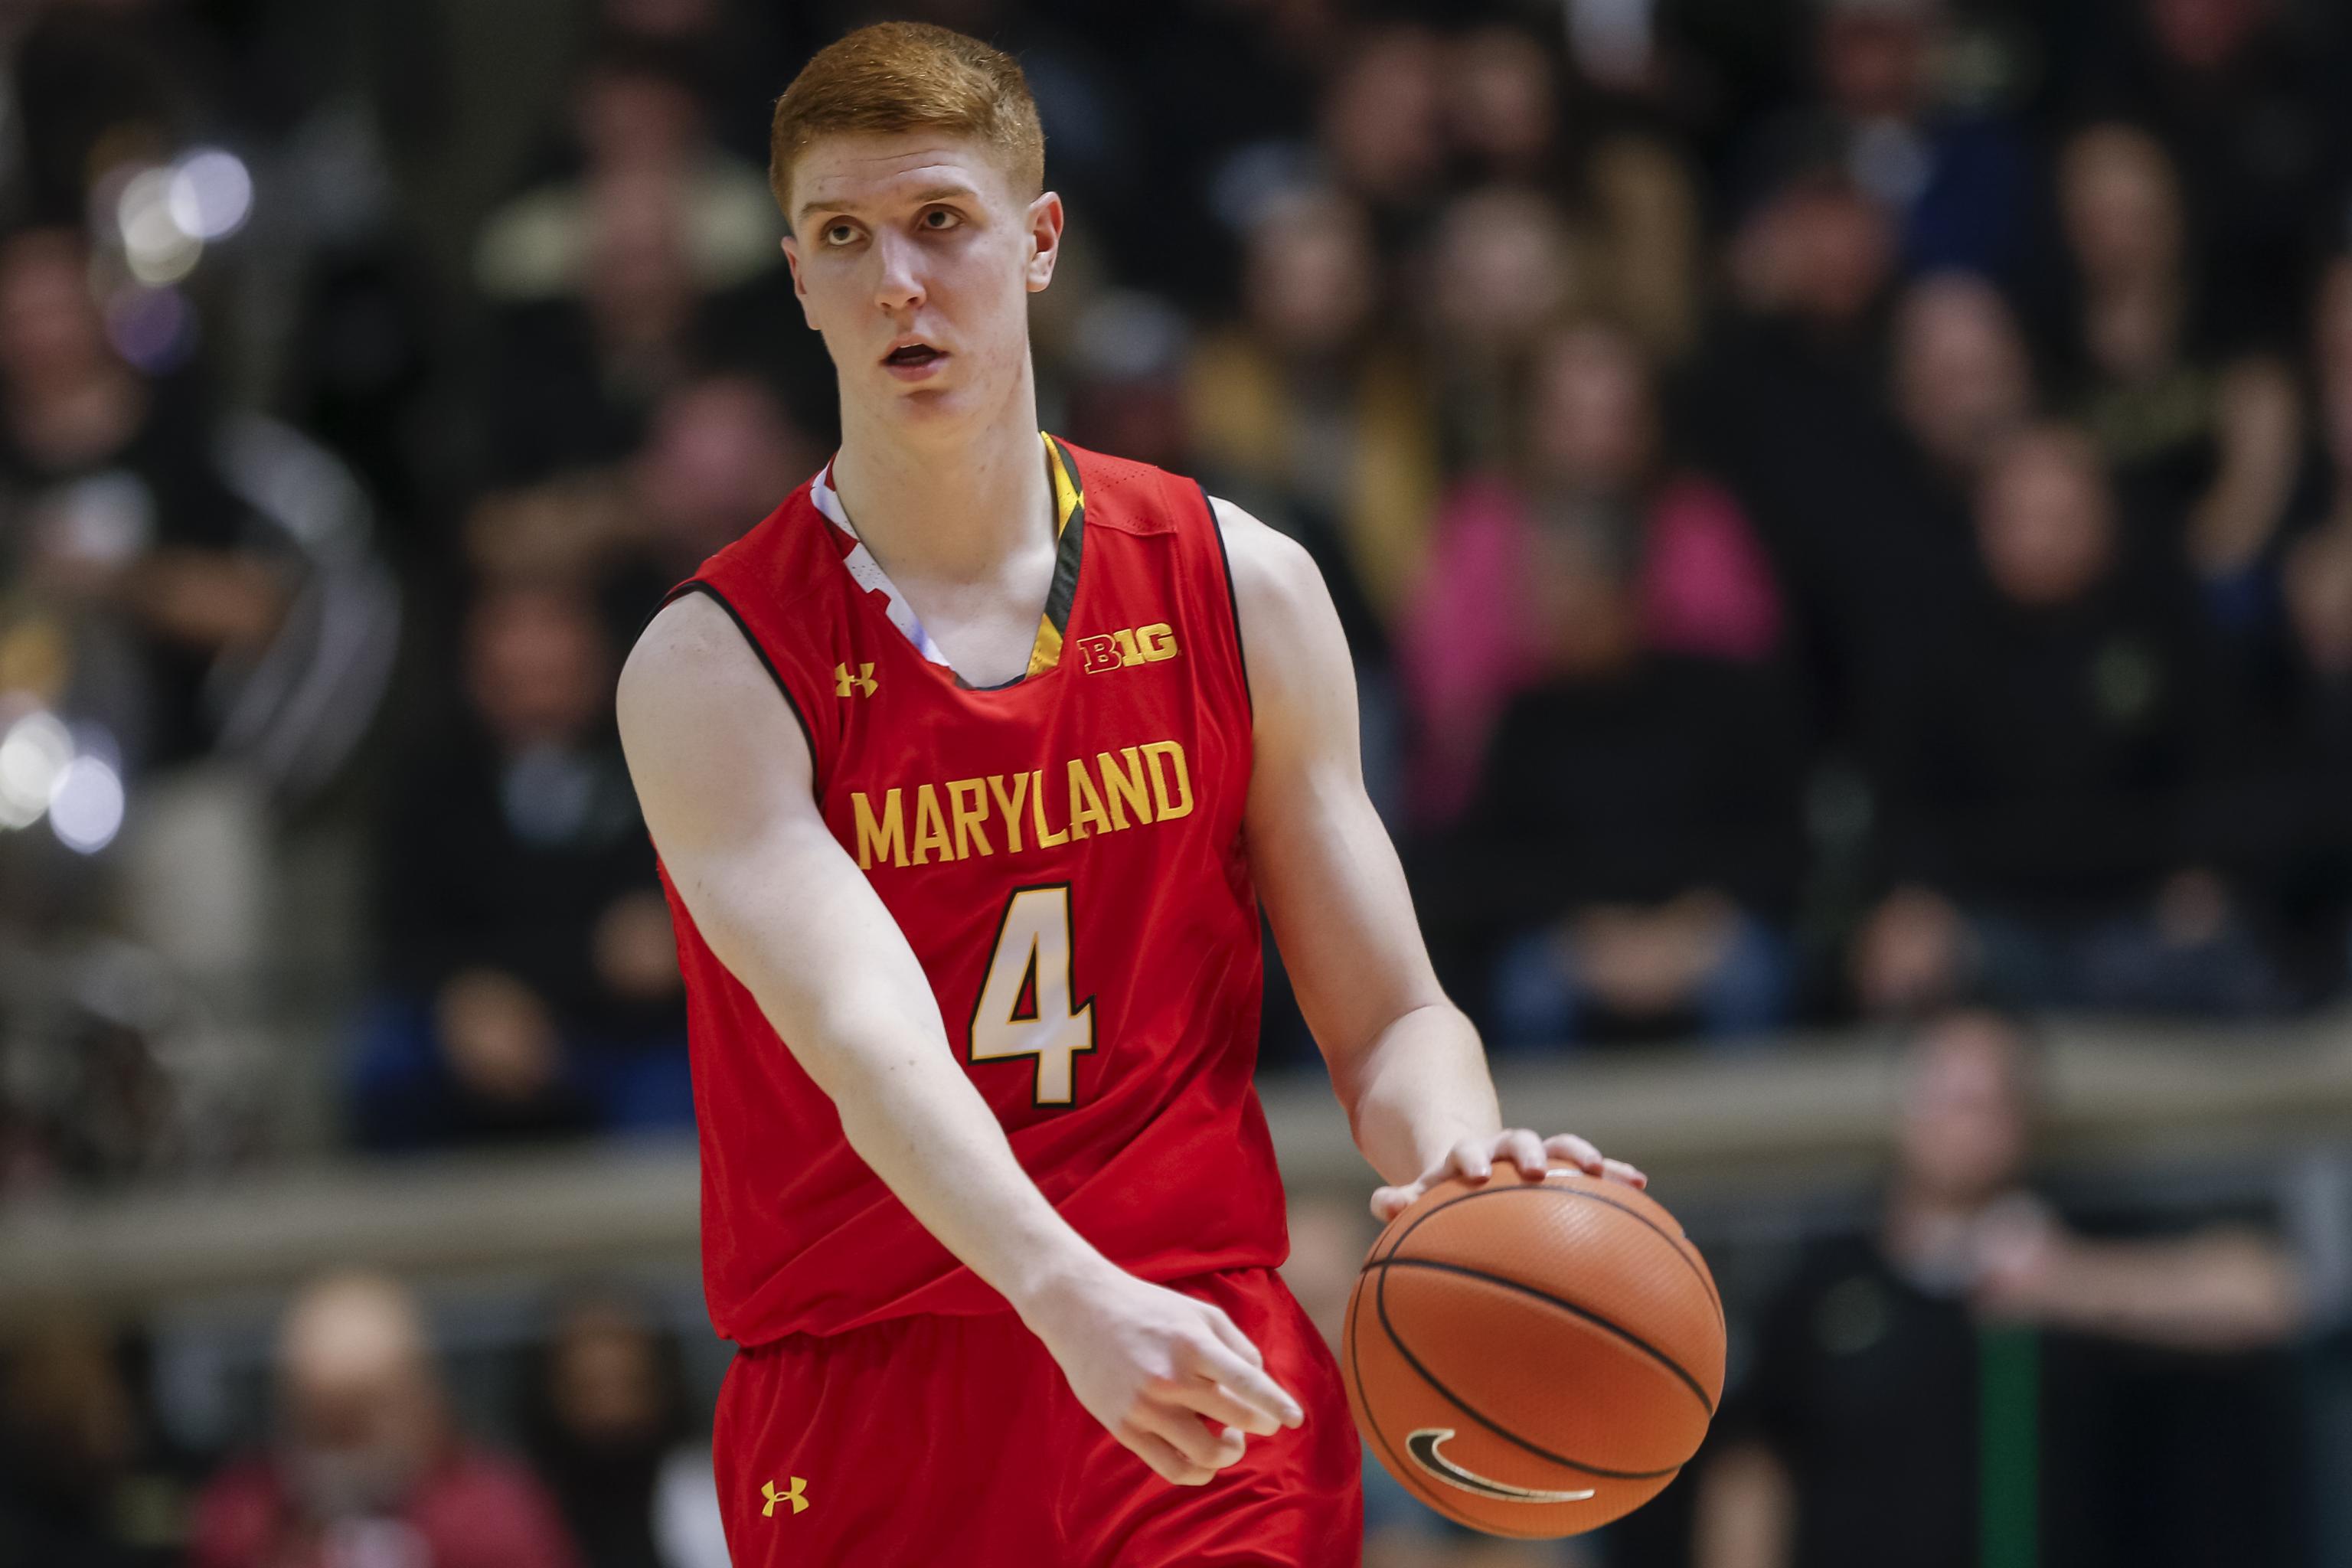 Maryland's Kevin Huerter leaving the Terps for the NBA